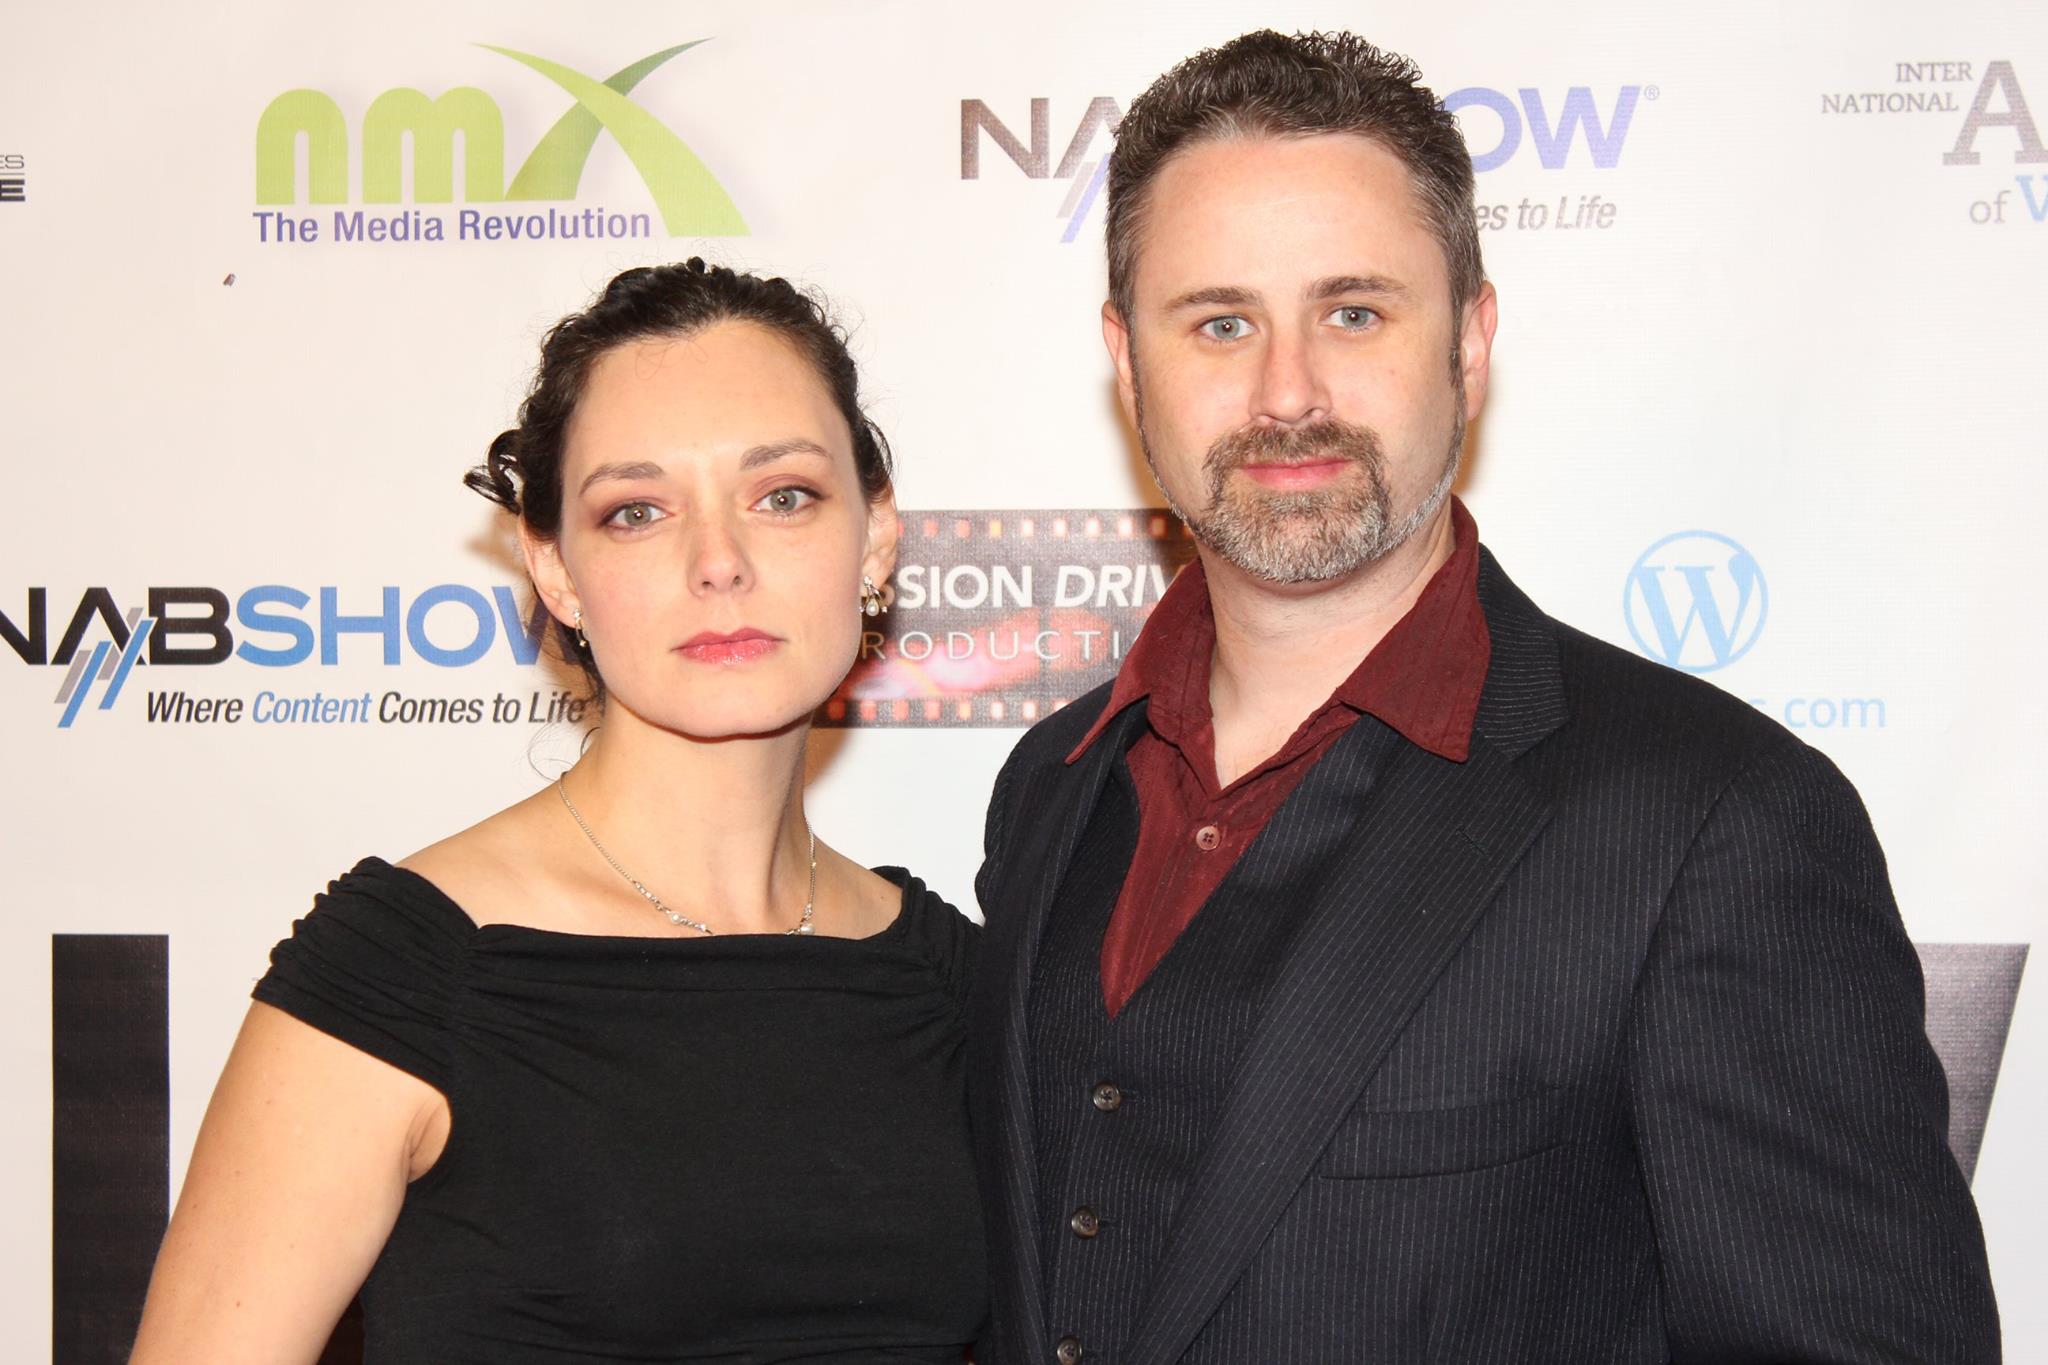 Ed Robinson & Jodie Younse at the 2015 IAWTV Awards